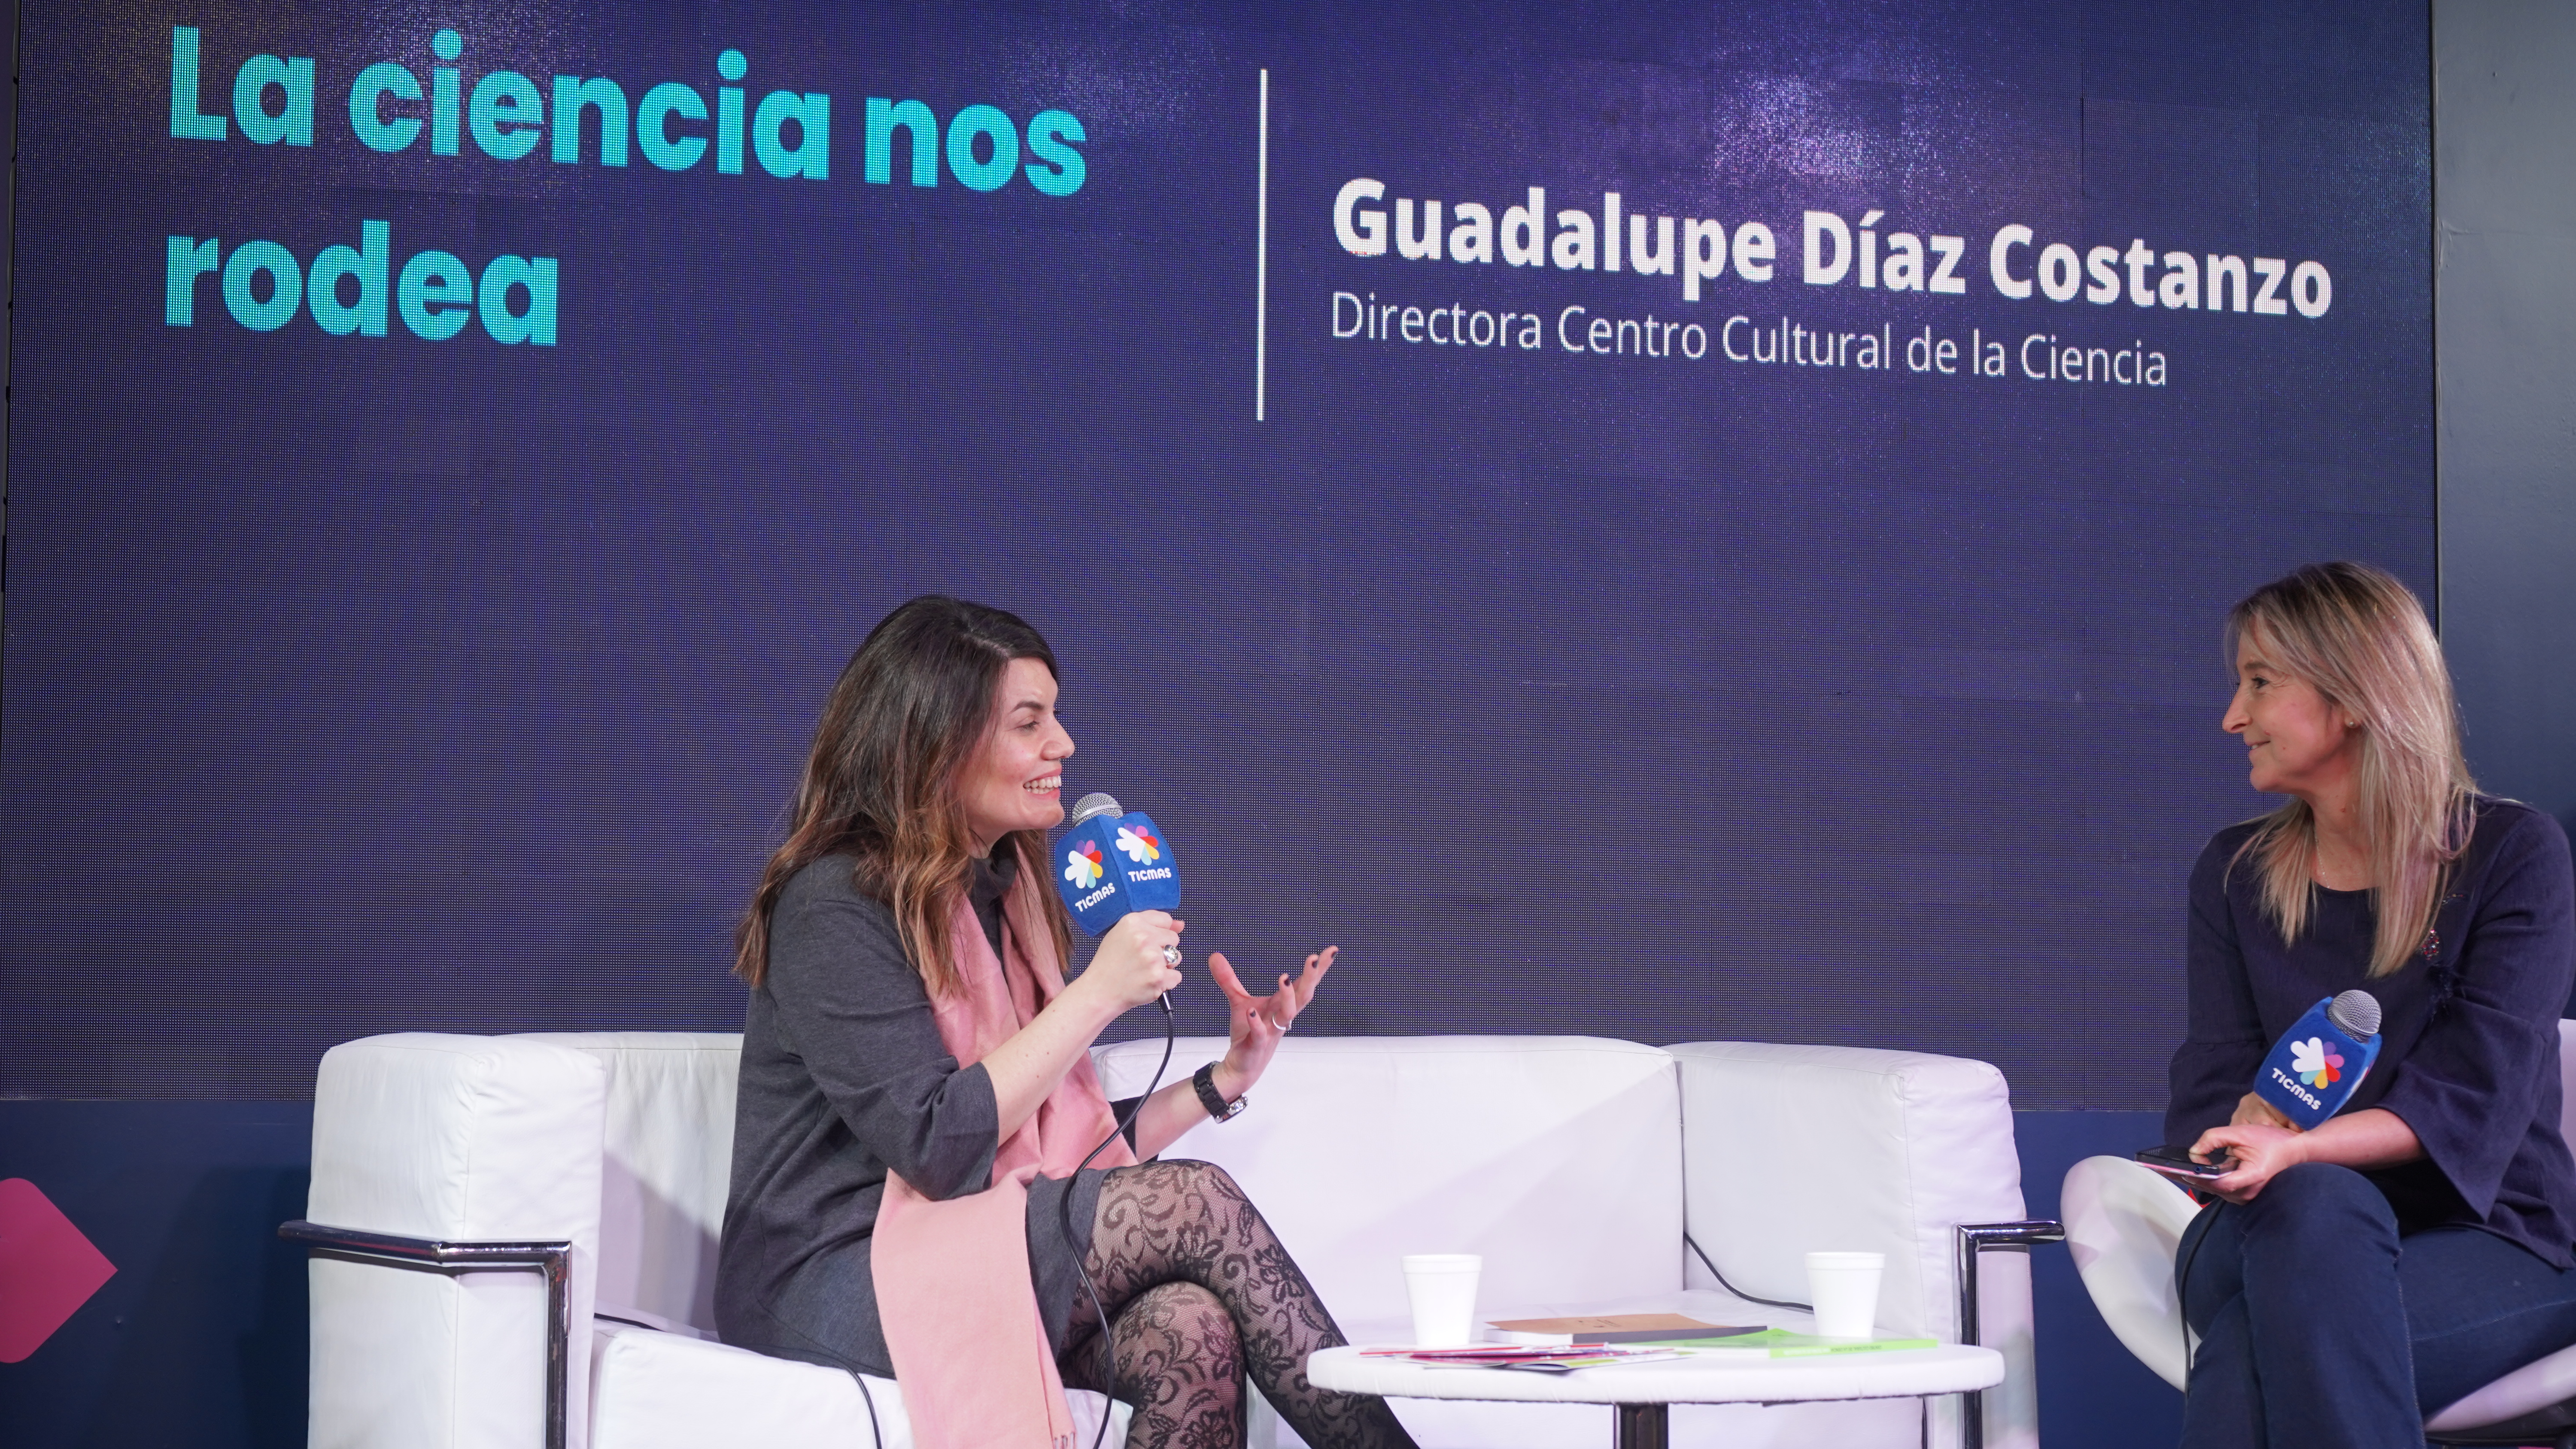 Guadalupe Diaz Costanzo, Director of C3, interviewed by Laura Marinucci at the Tecmas Hall at the Book Fair